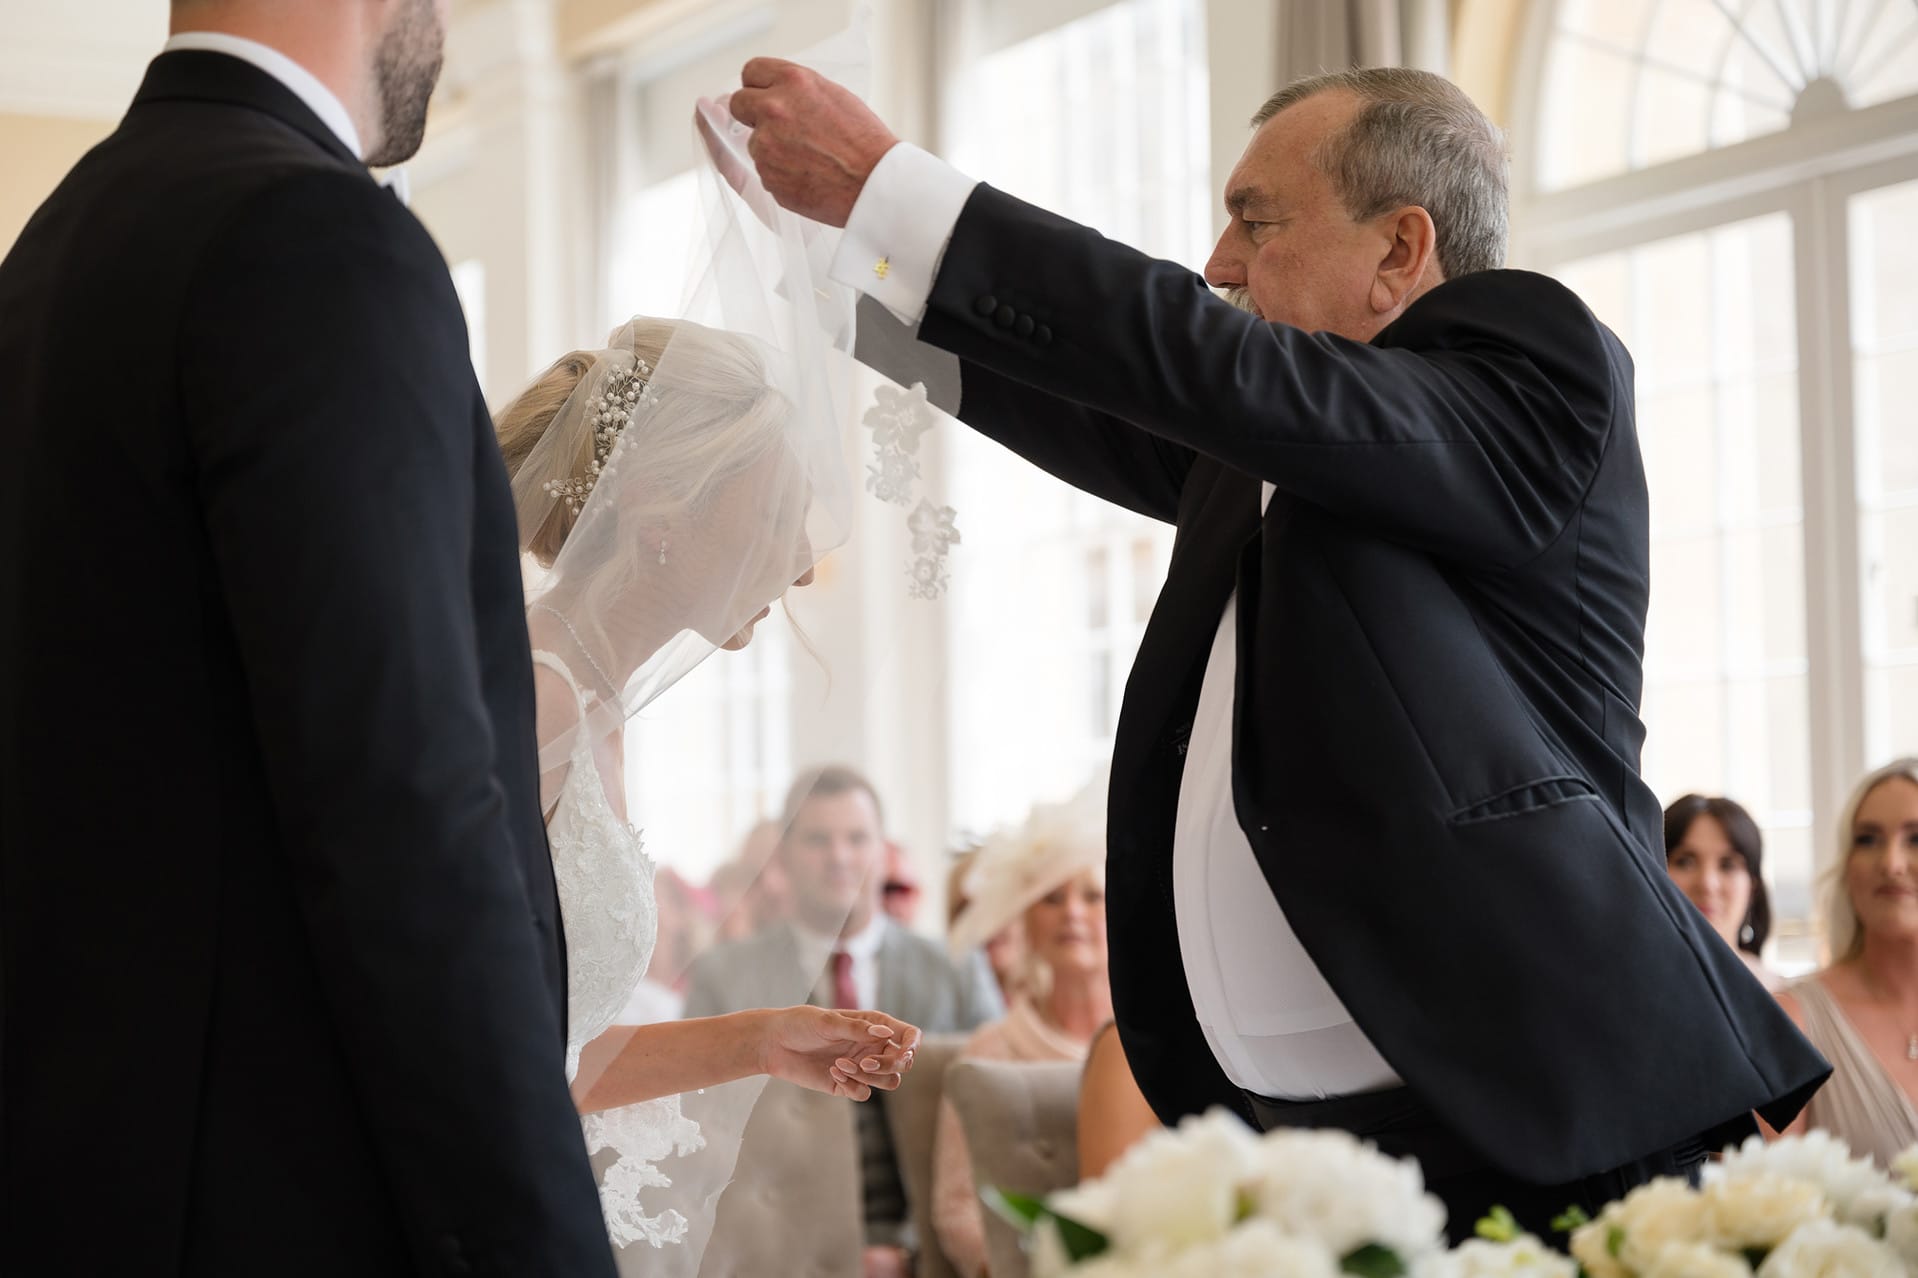 Father of the bride lifting bride's veil